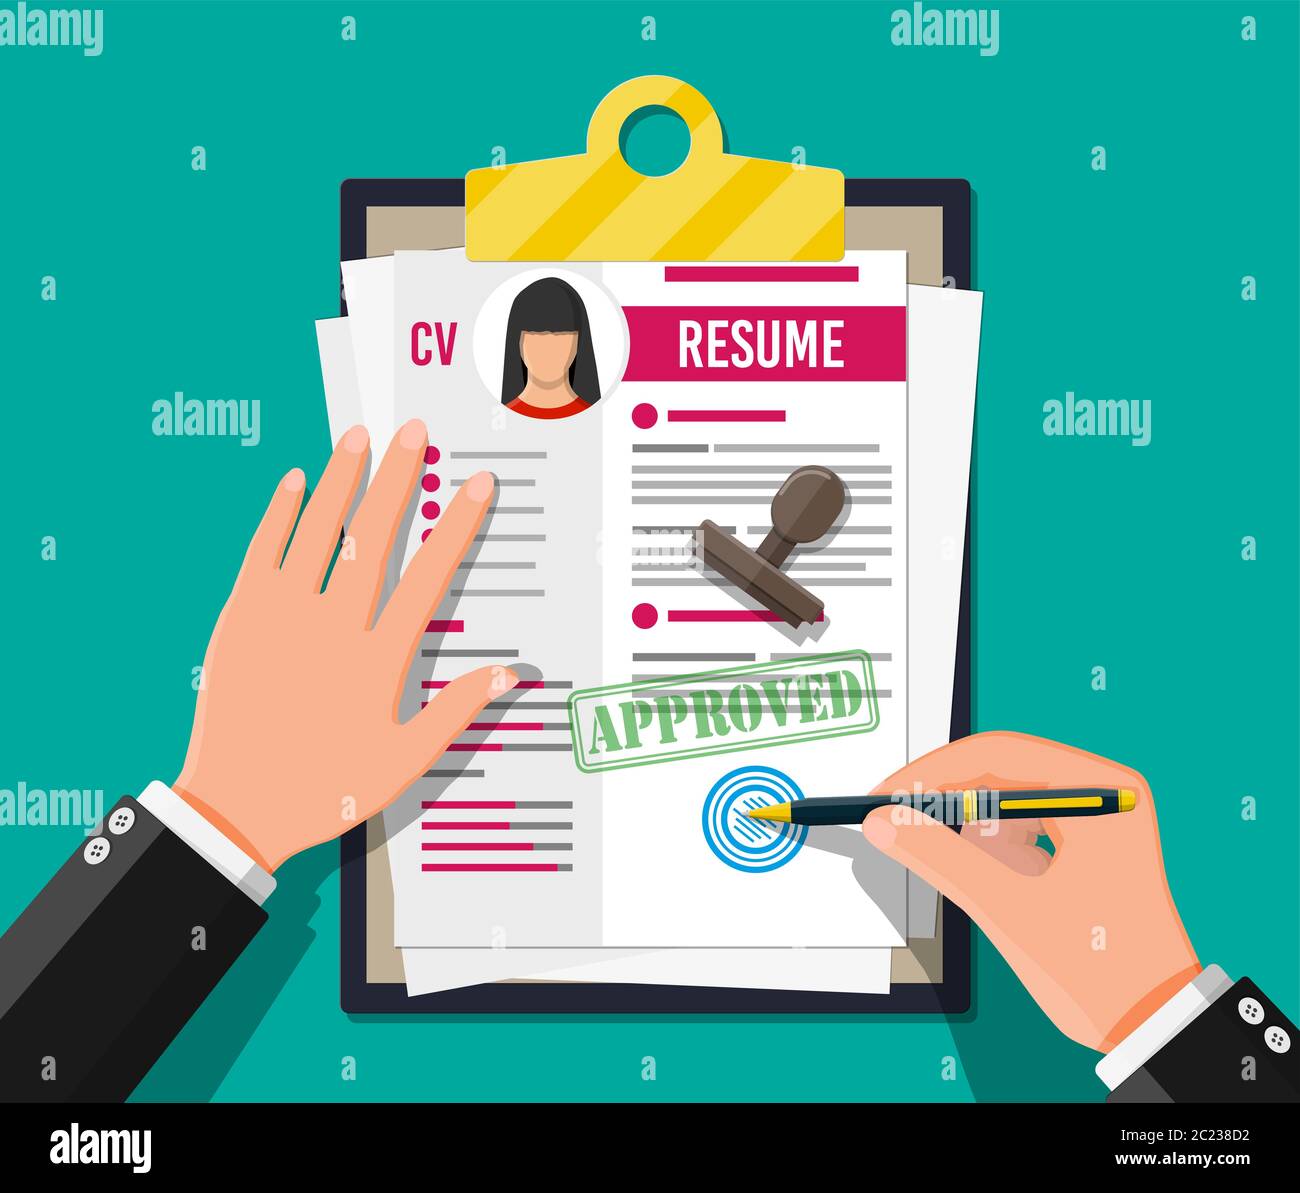 Apply Resume Cliparts, Stock Vector and Royalty Free Apply Resume  Illustrations